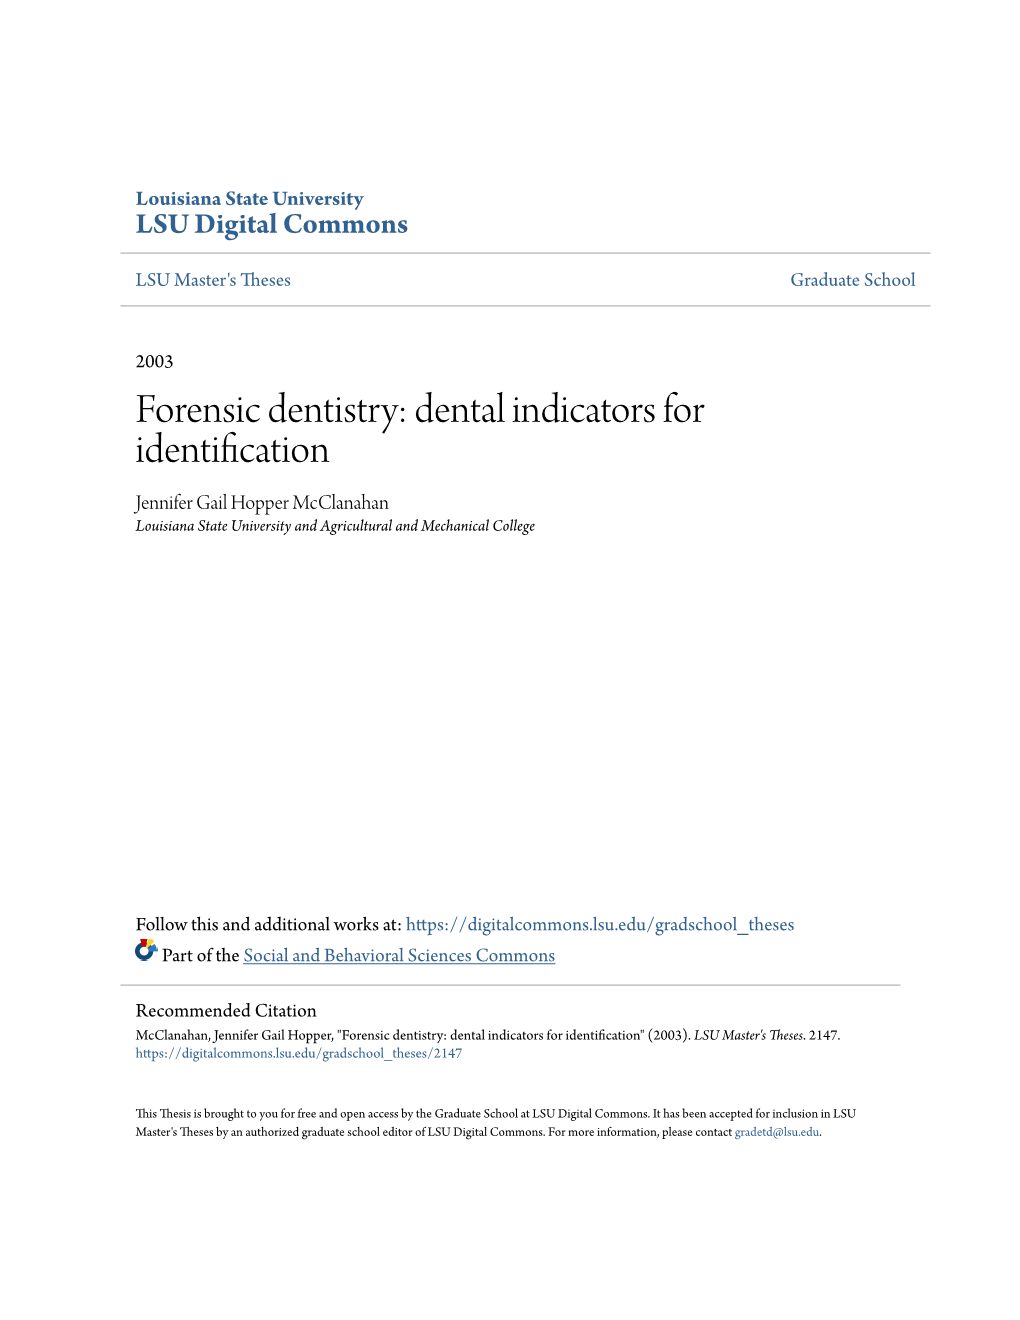 Forensic Dentistry: Dental Indicators for Identification Jennifer Gail Hopper Mcclanahan Louisiana State University and Agricultural and Mechanical College